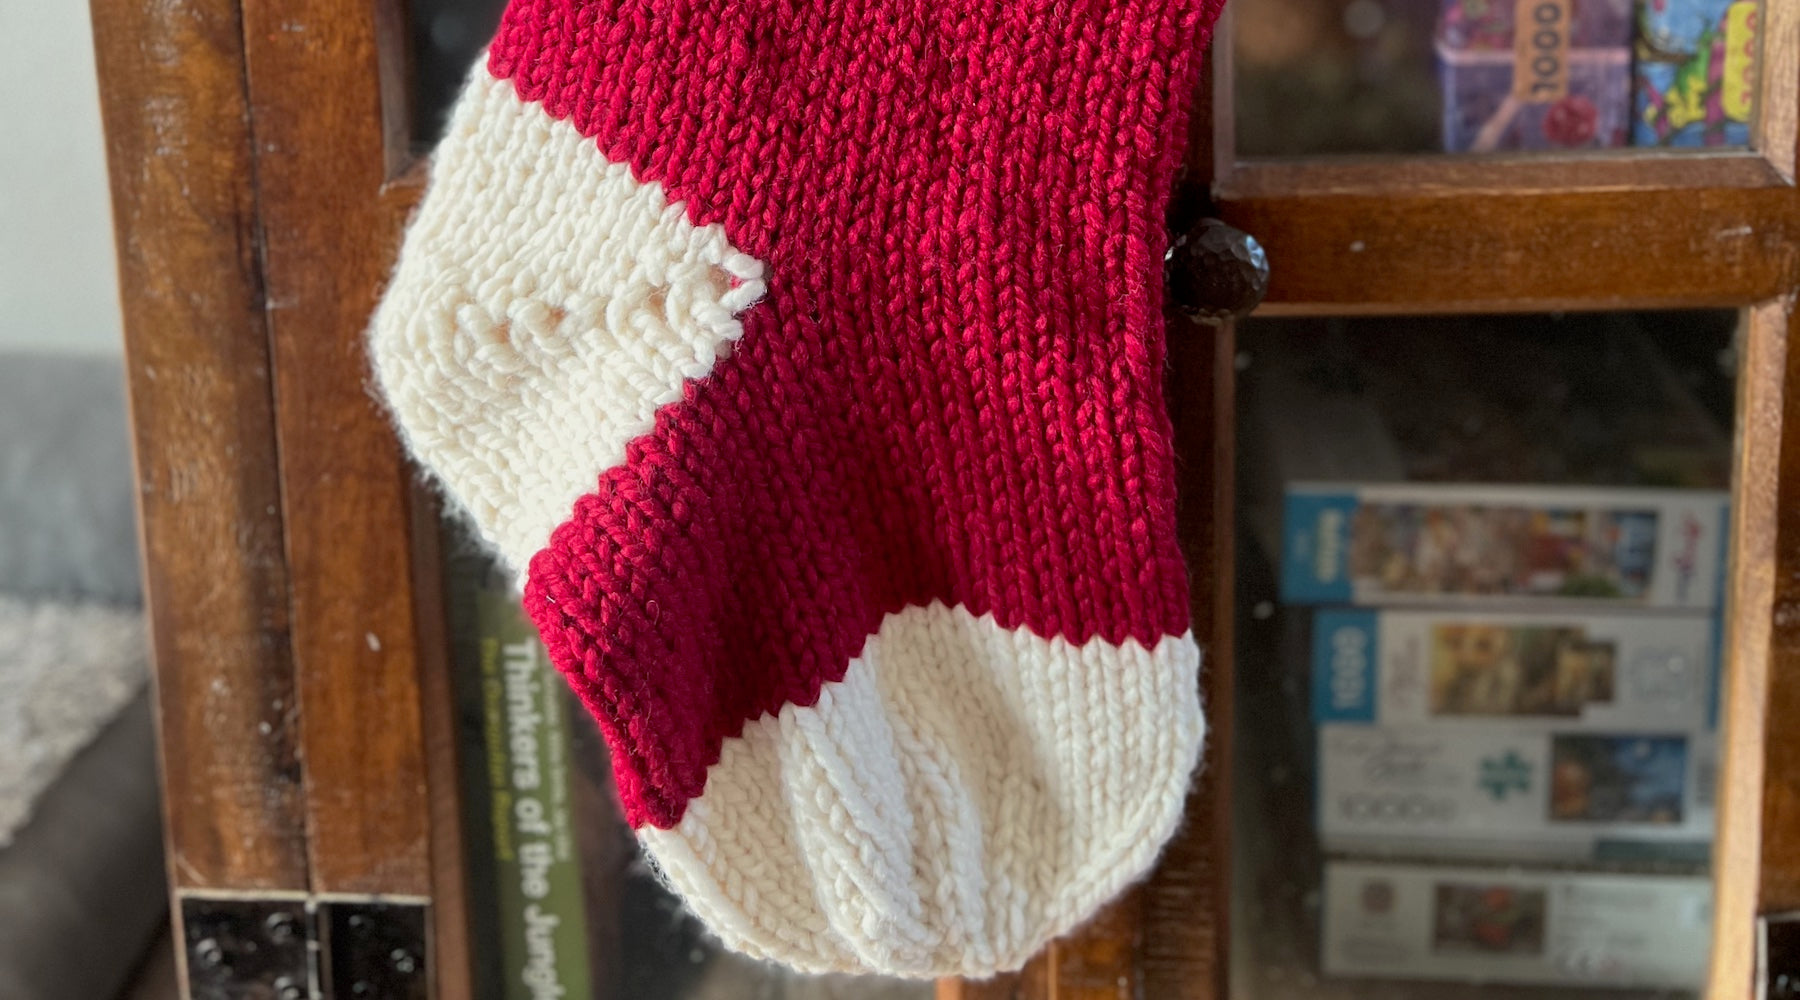 Pattern Release: The Classic Christmas Stocking